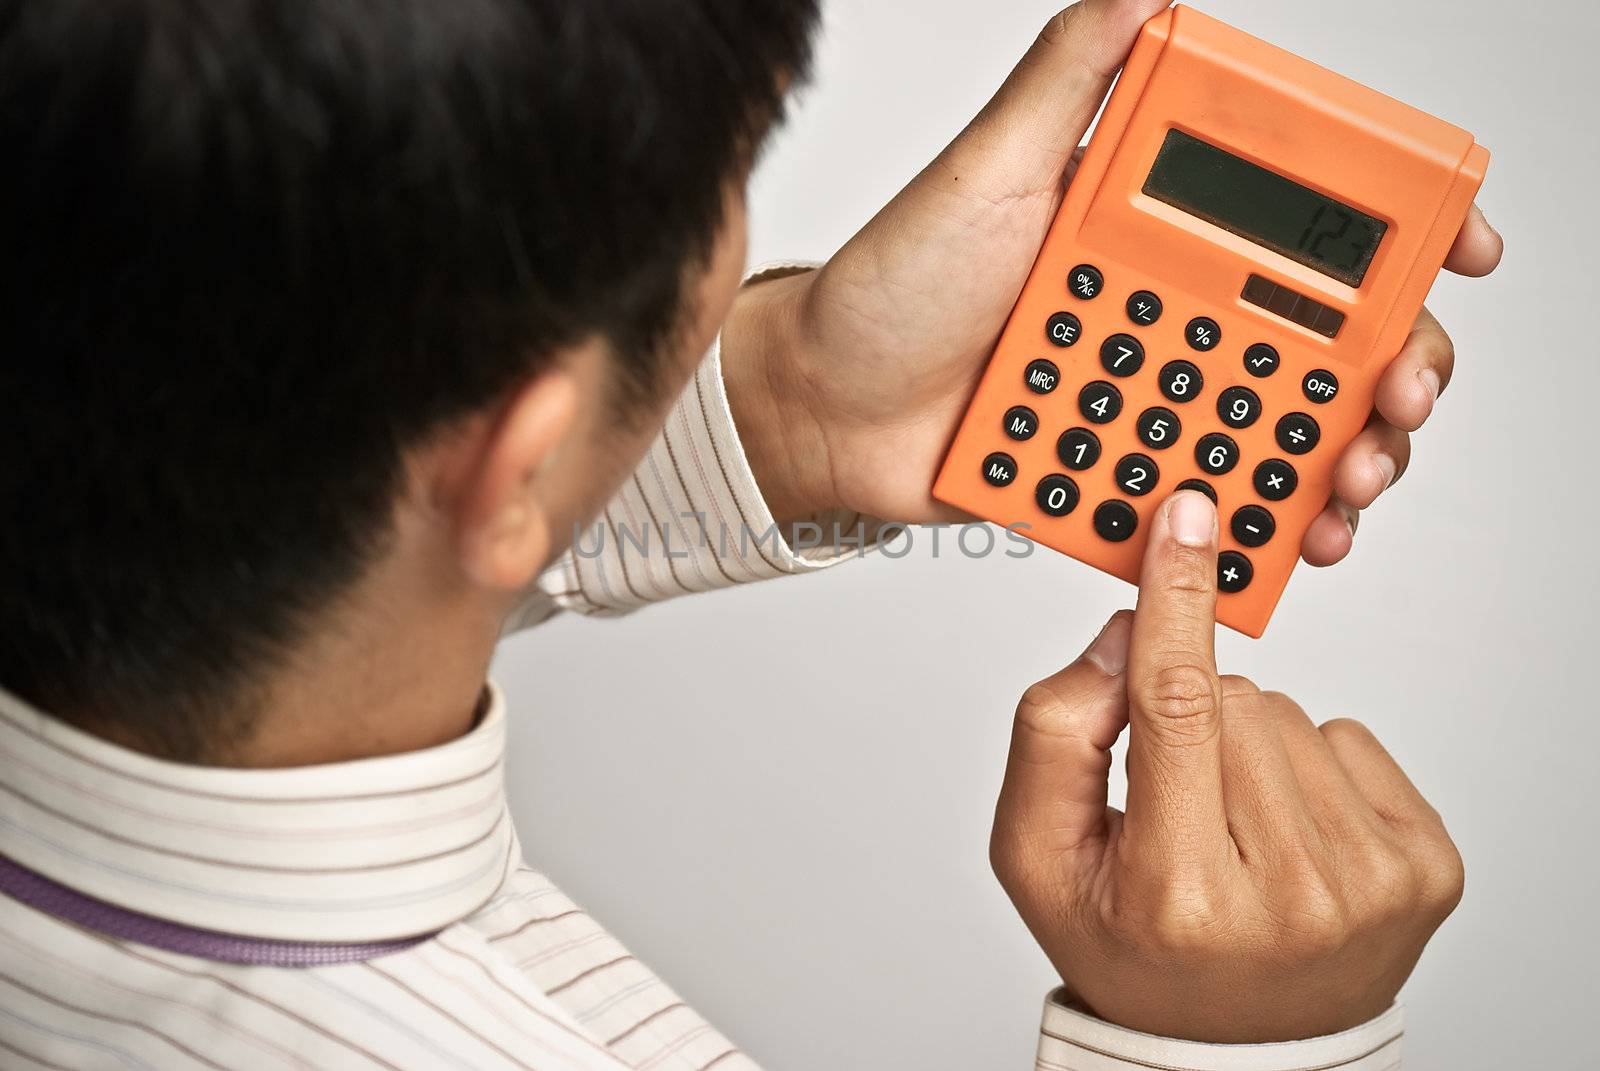 Calculator on businessman's hand, business concept of finance .